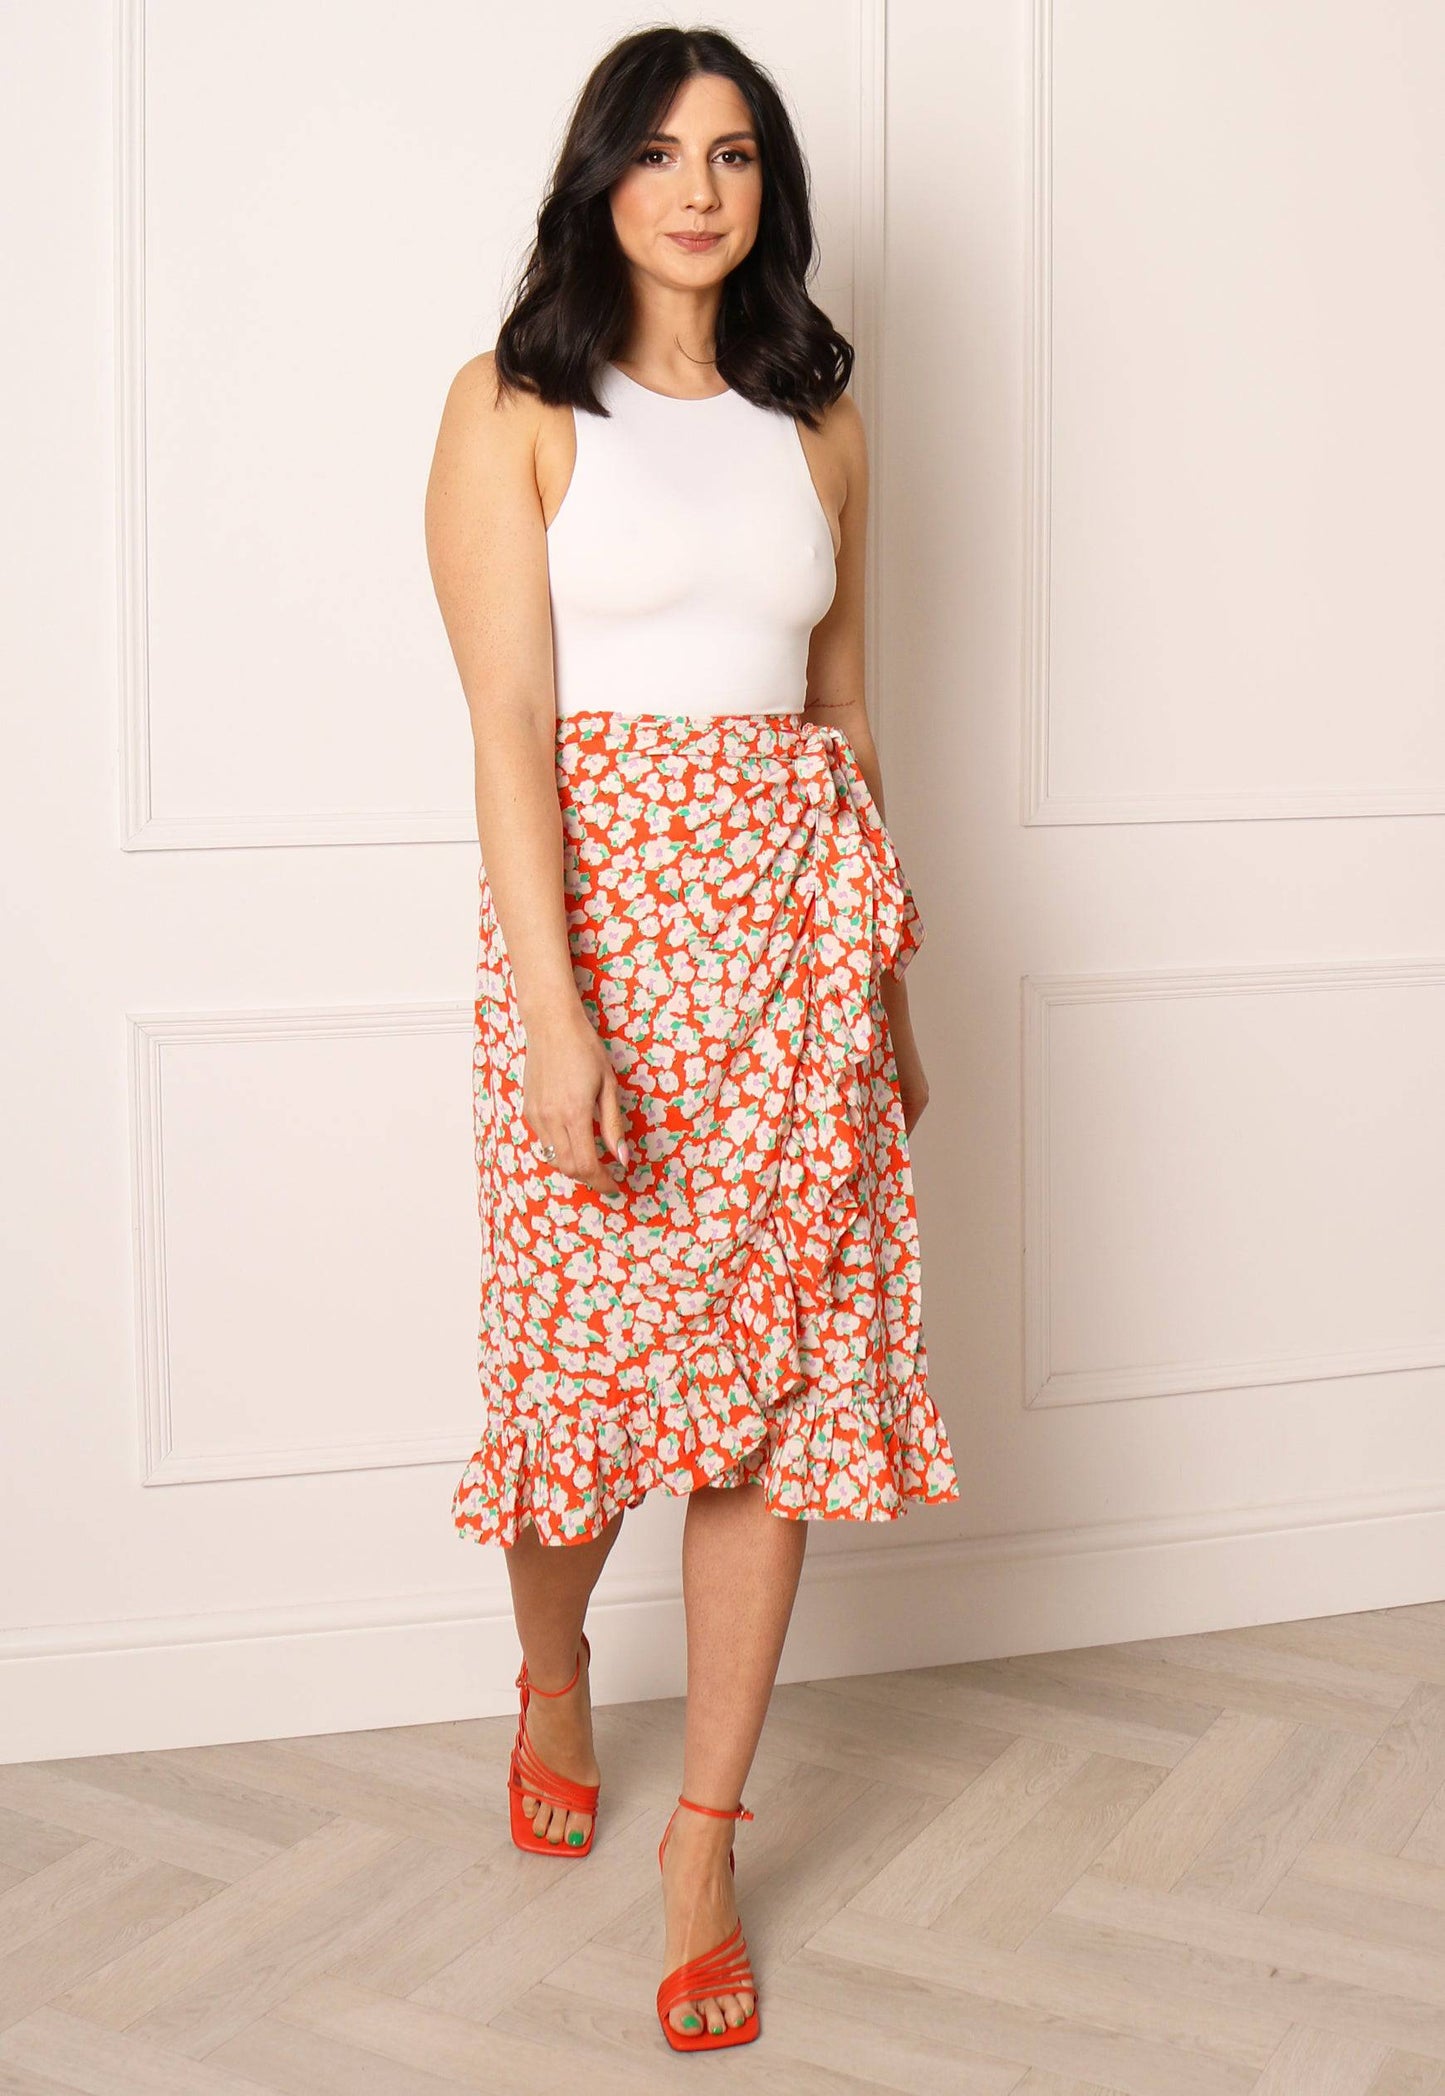 VERO MODA Olea Floral Print Frill Wrap Midi Skirt in Tomato Red - One Nation Clothing